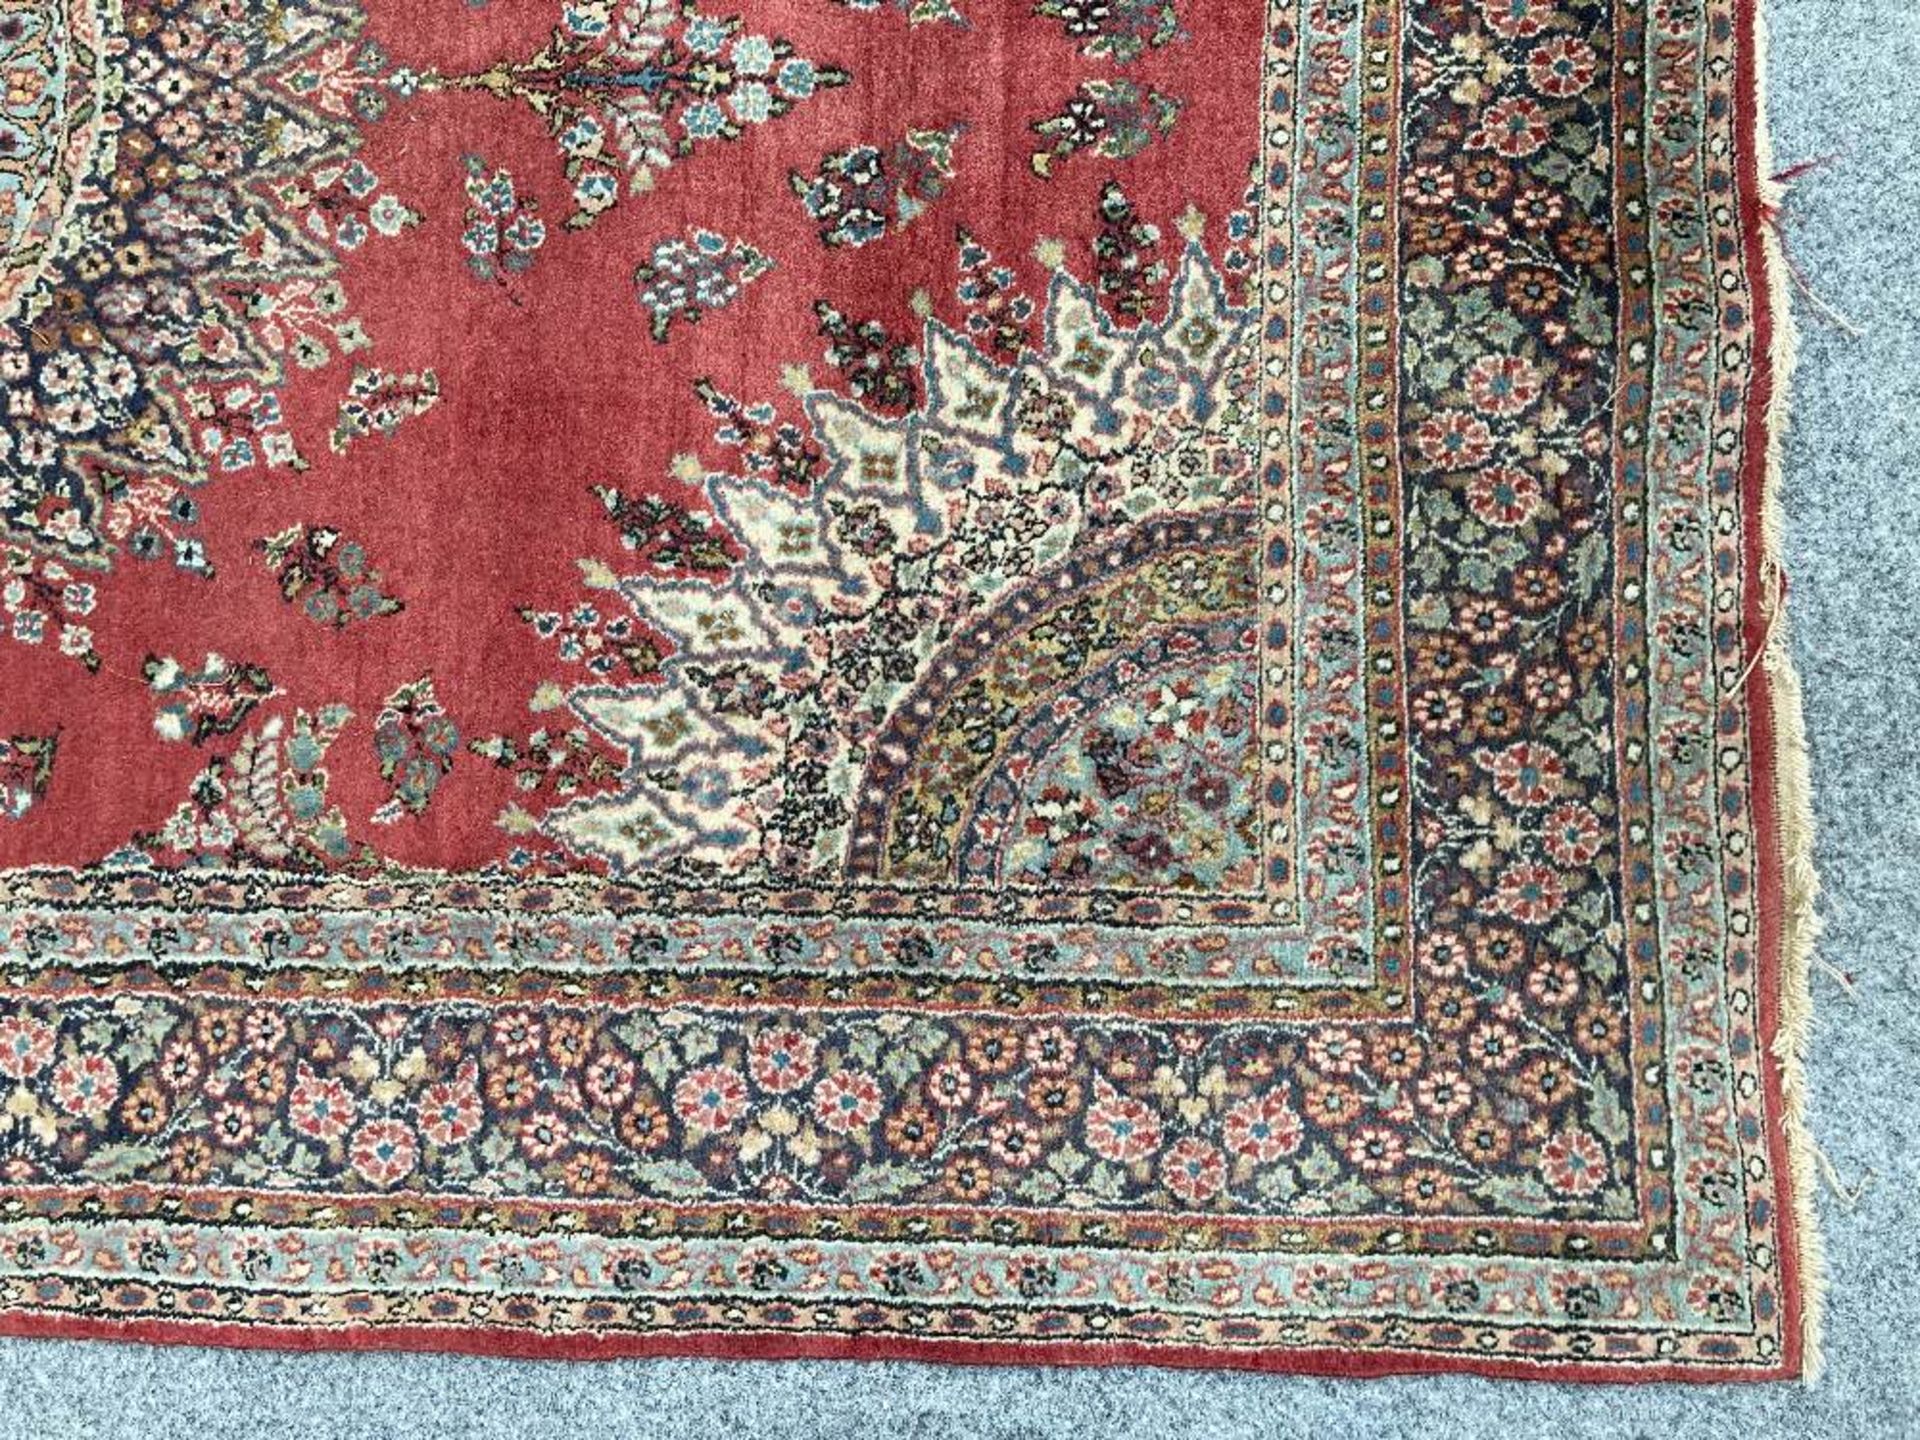 A PERSIAN RUG, hand-knotted, the deep red field with a highly decorative cream and blue circular - Image 3 of 4